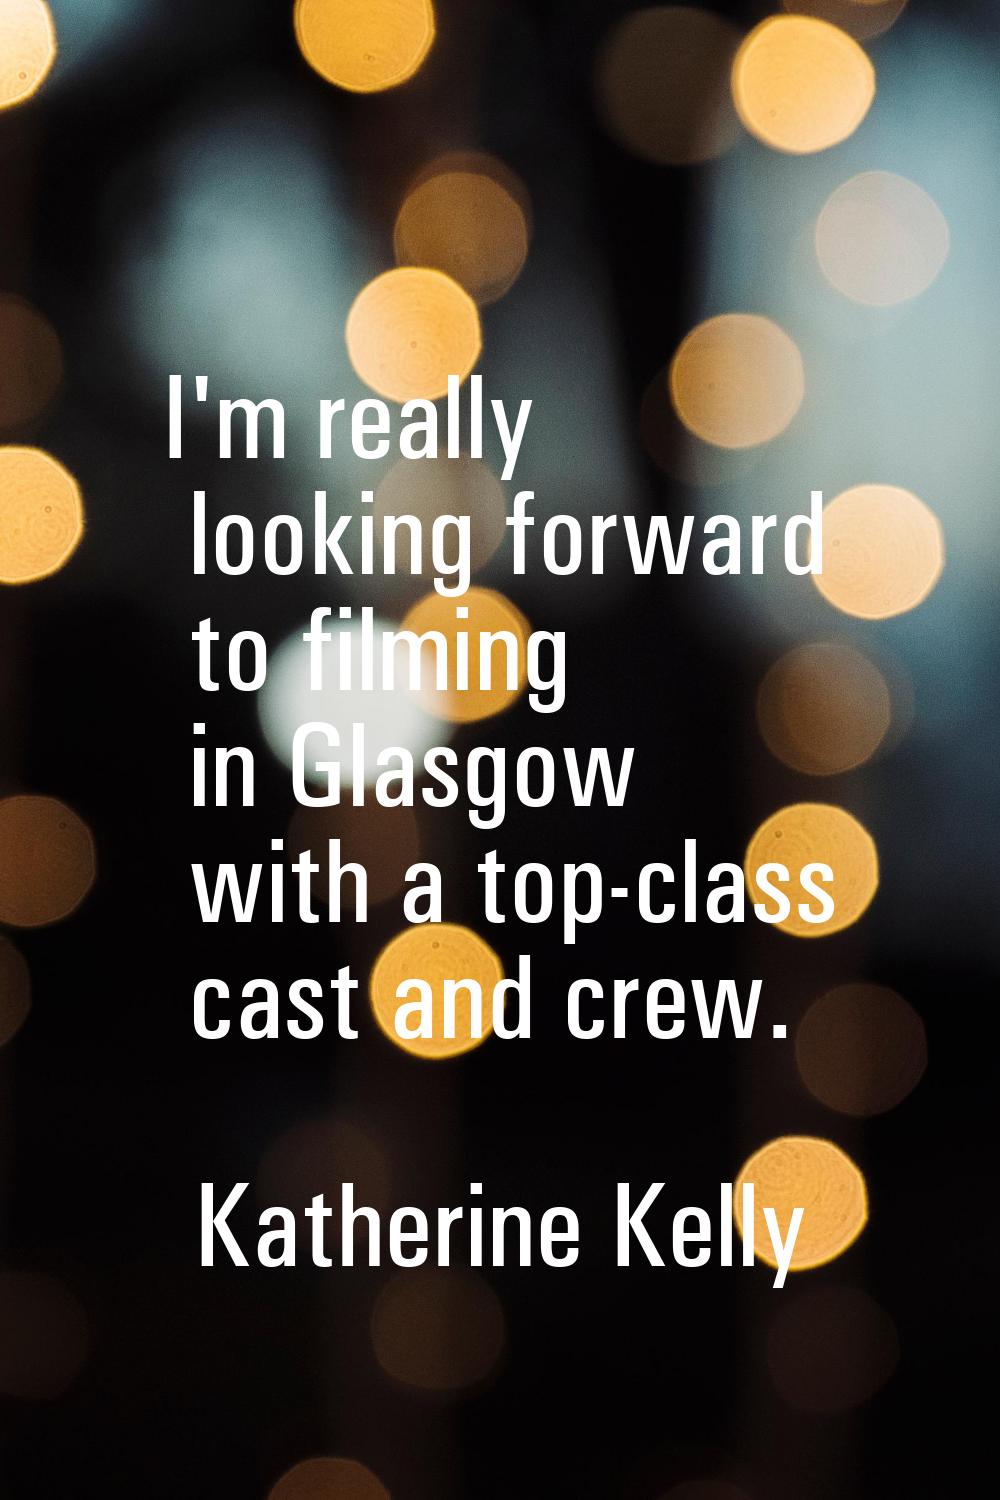 I'm really looking forward to filming in Glasgow with a top-class cast and crew.